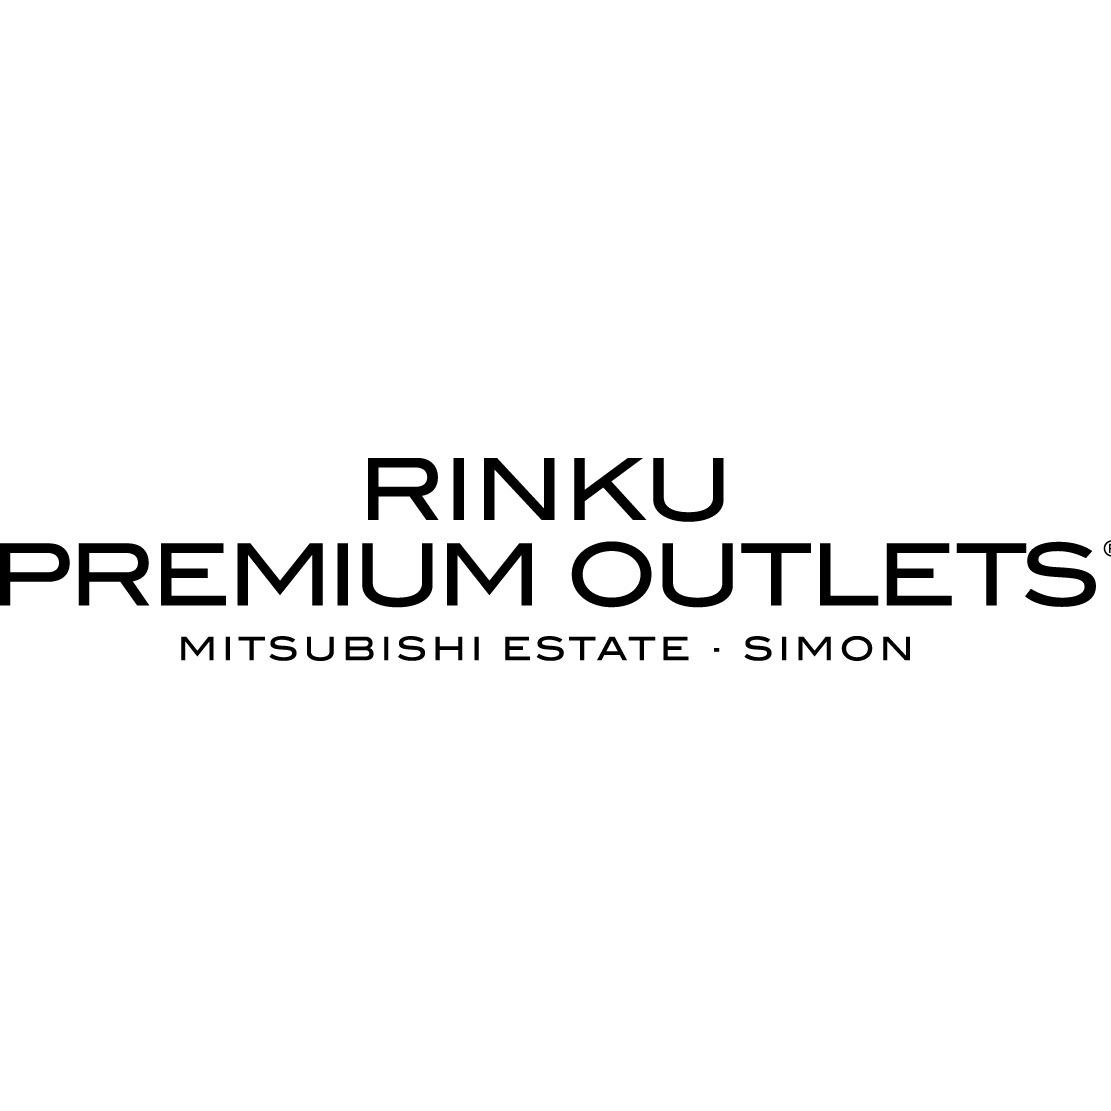 Store Listings Center Map Search Using One Word Rinku Premium Outlets Premium Outlets